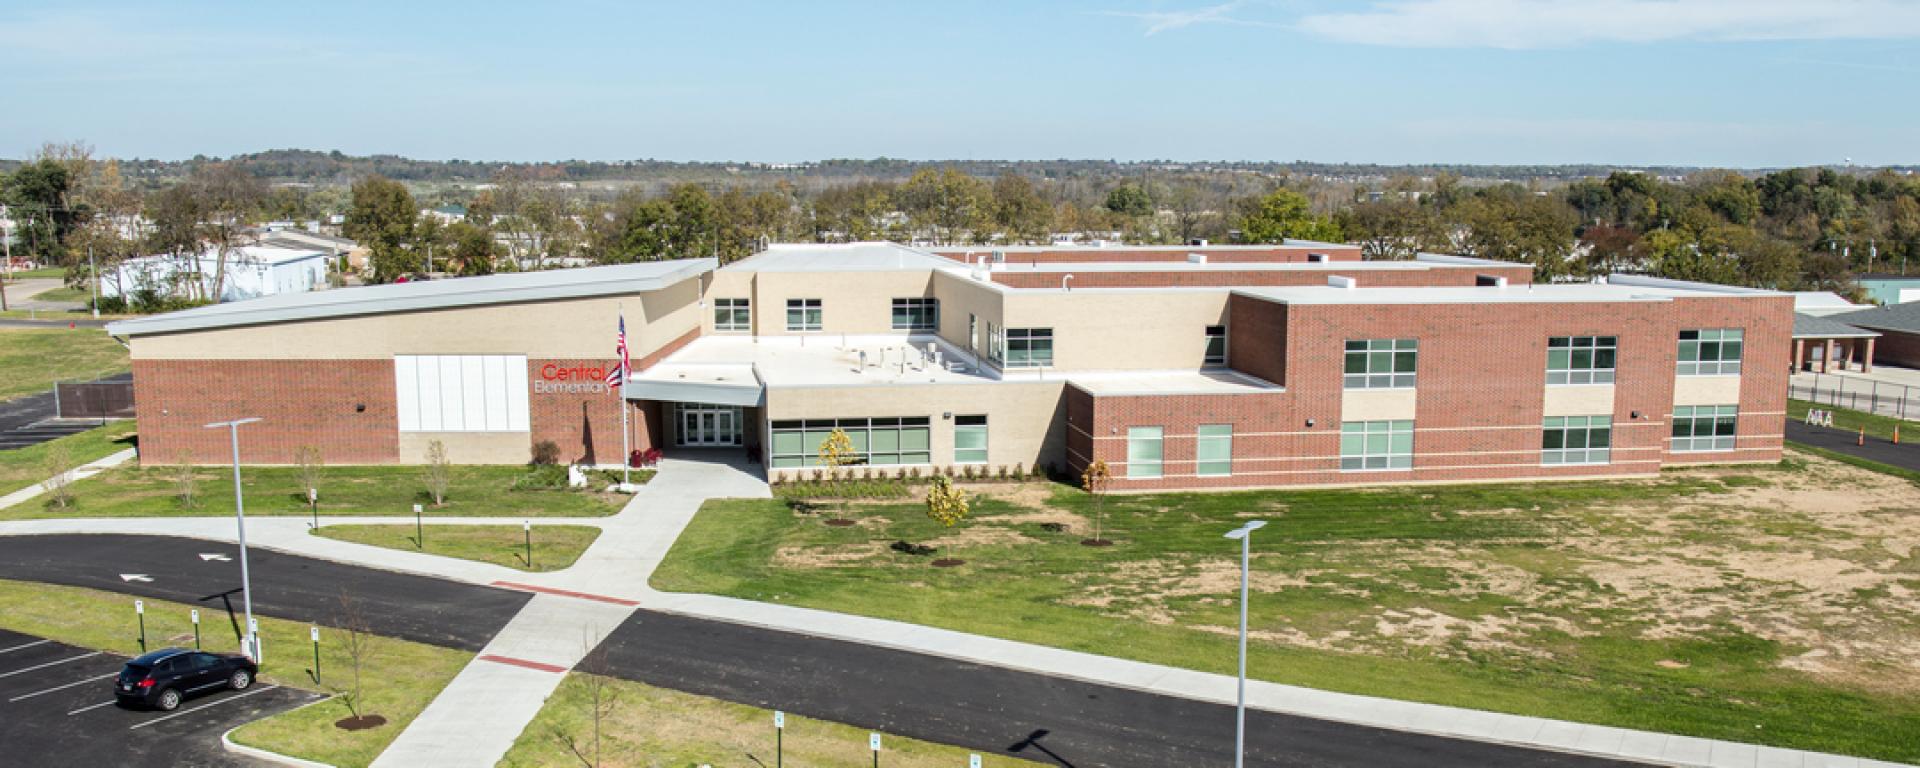 Aerial view of Fairfield Central Elementary School